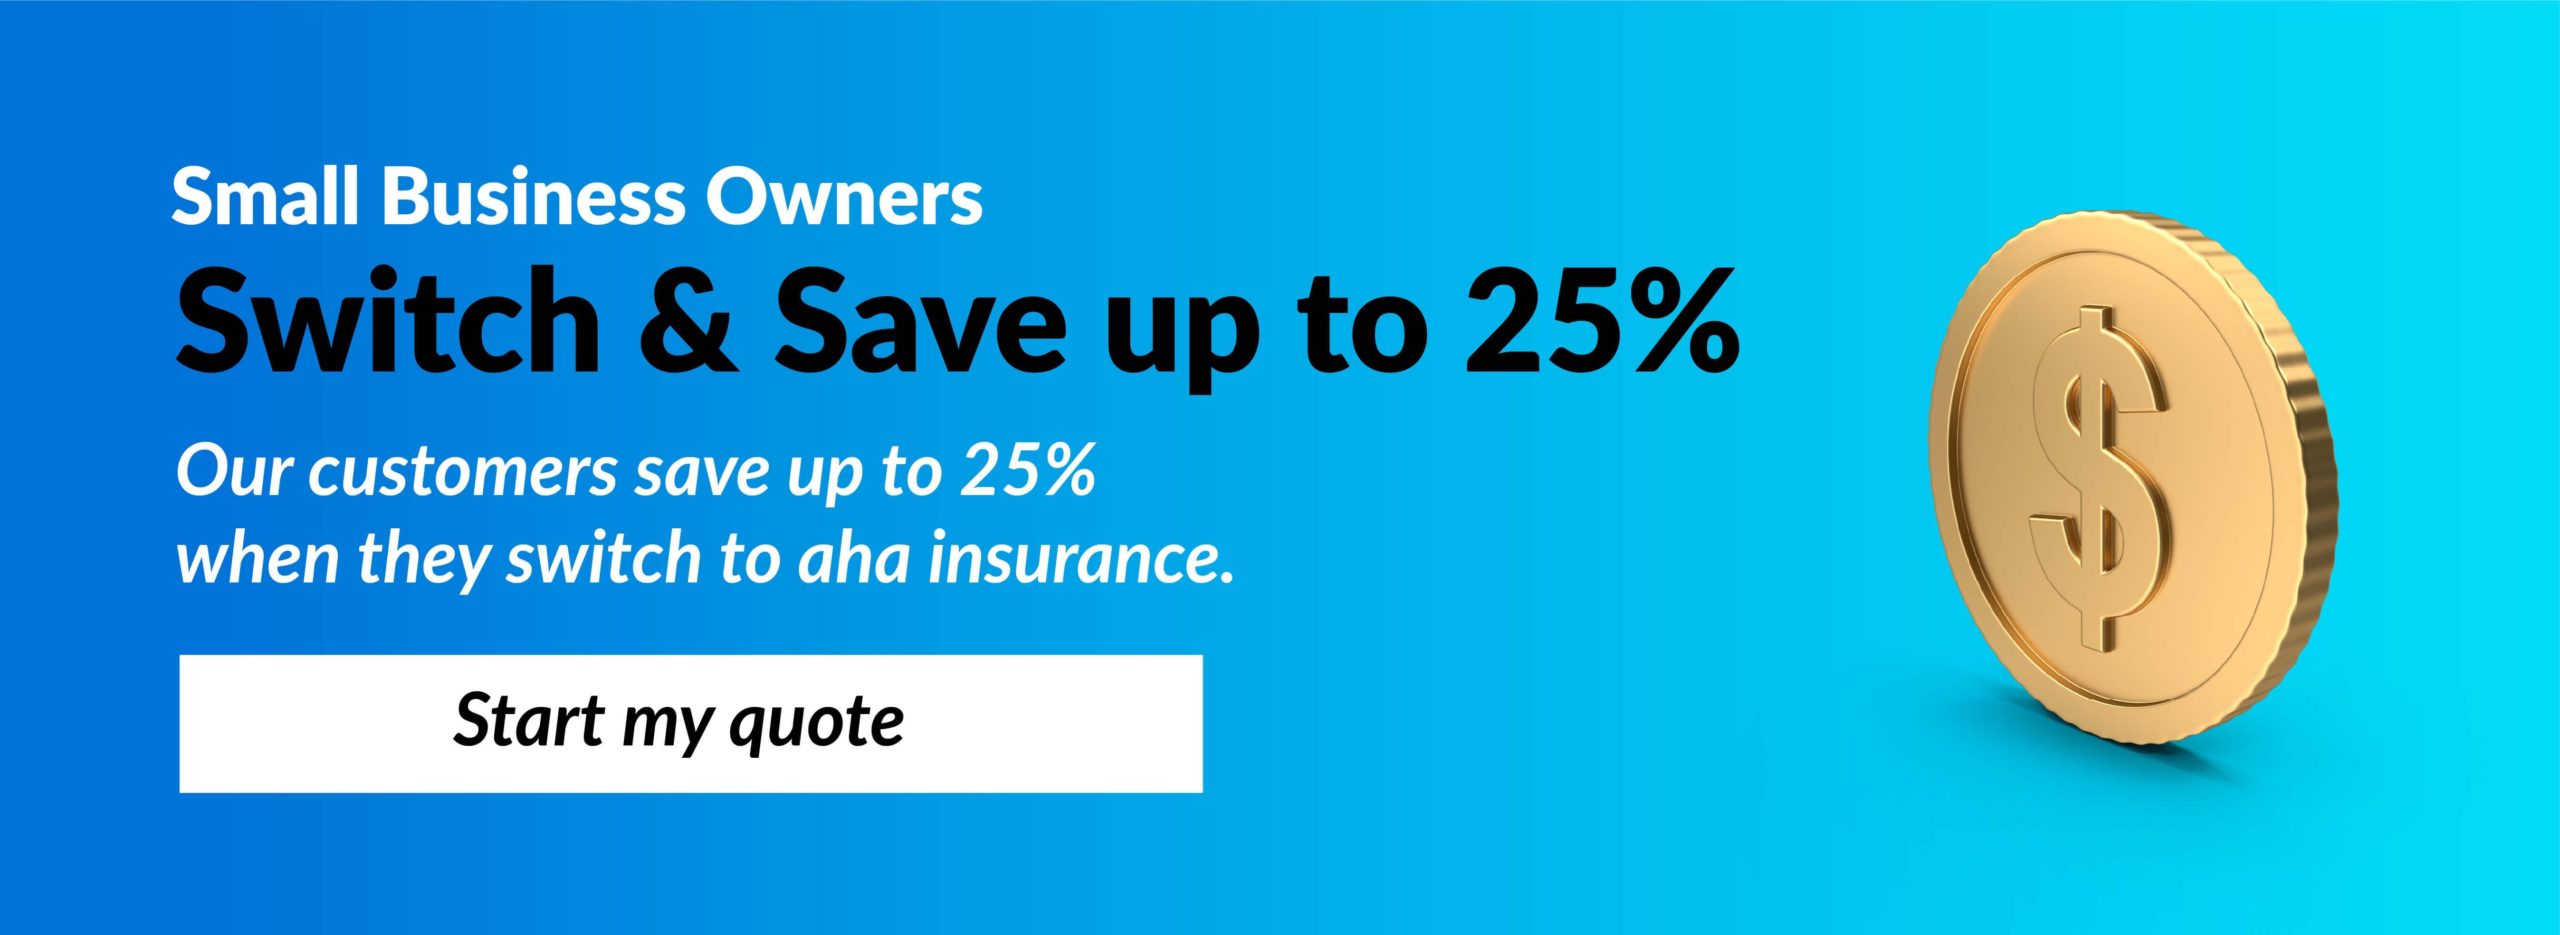 Small Business Owners - Switch & Save up to 25% When they switch to aha insurance. Start my quote